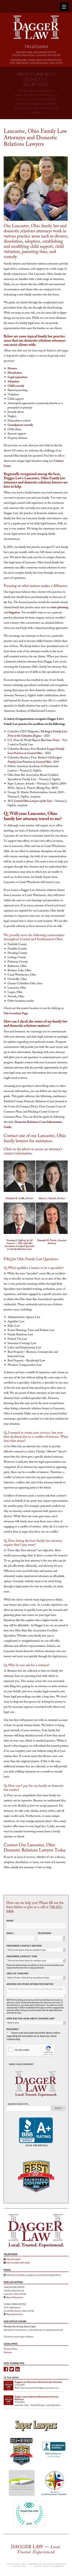 Dagger Law - Lancaster OH Lawyers